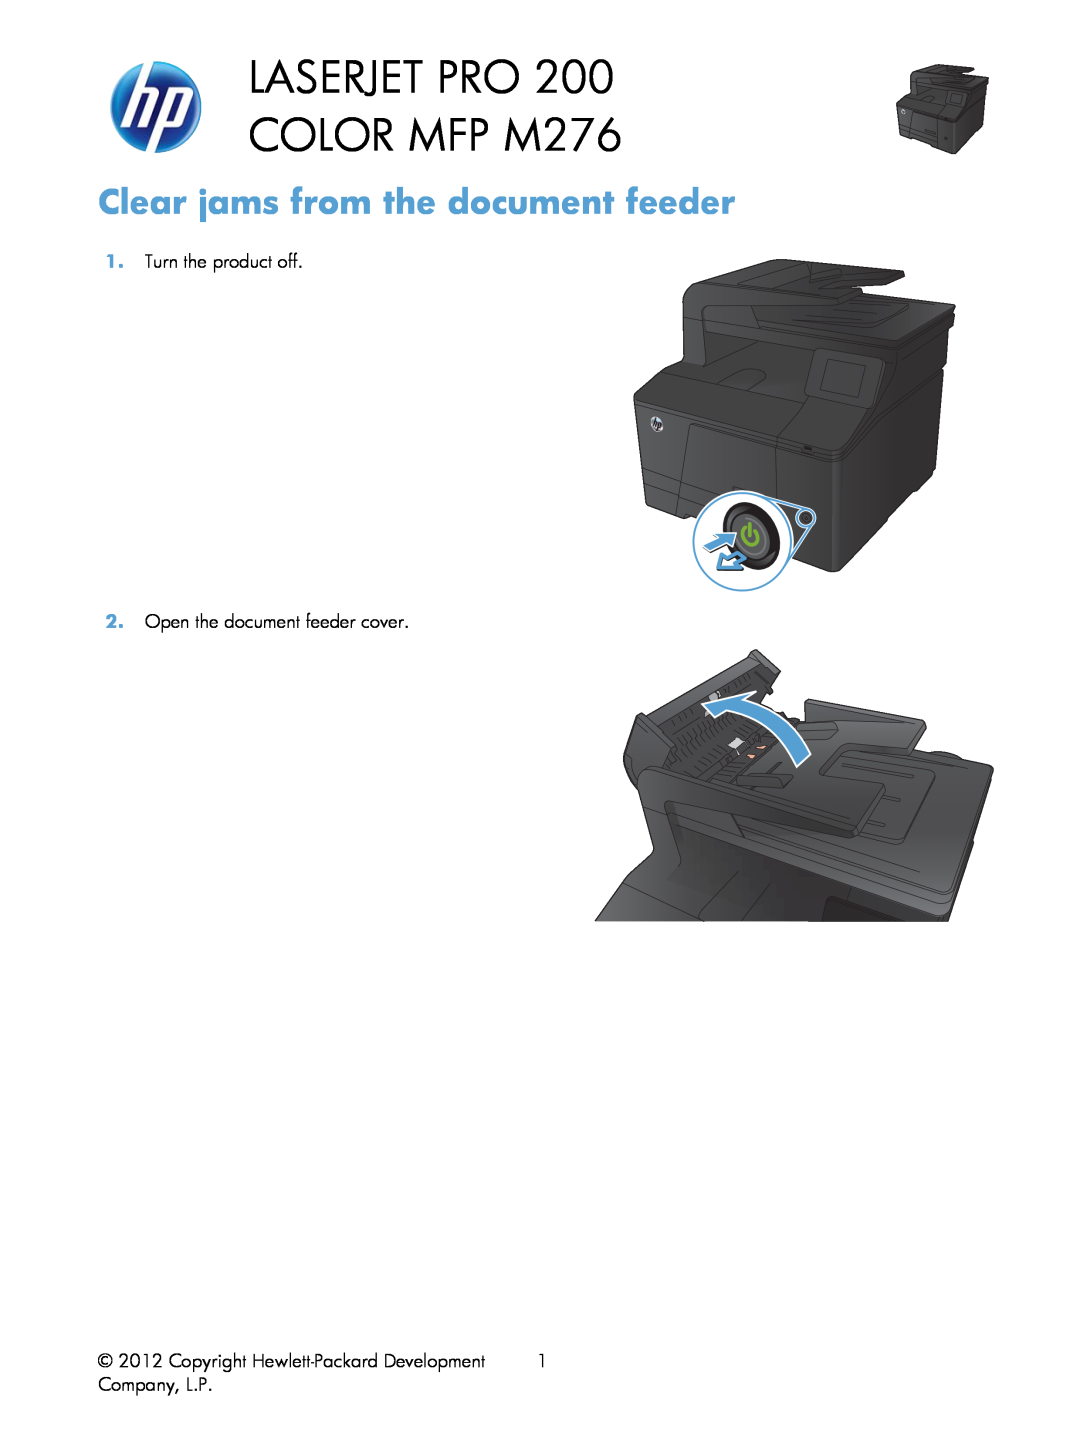 HP 200 color MFP M276 Clear jams from the document feeder manual Turn the product off 2. Open the document feeder cover 